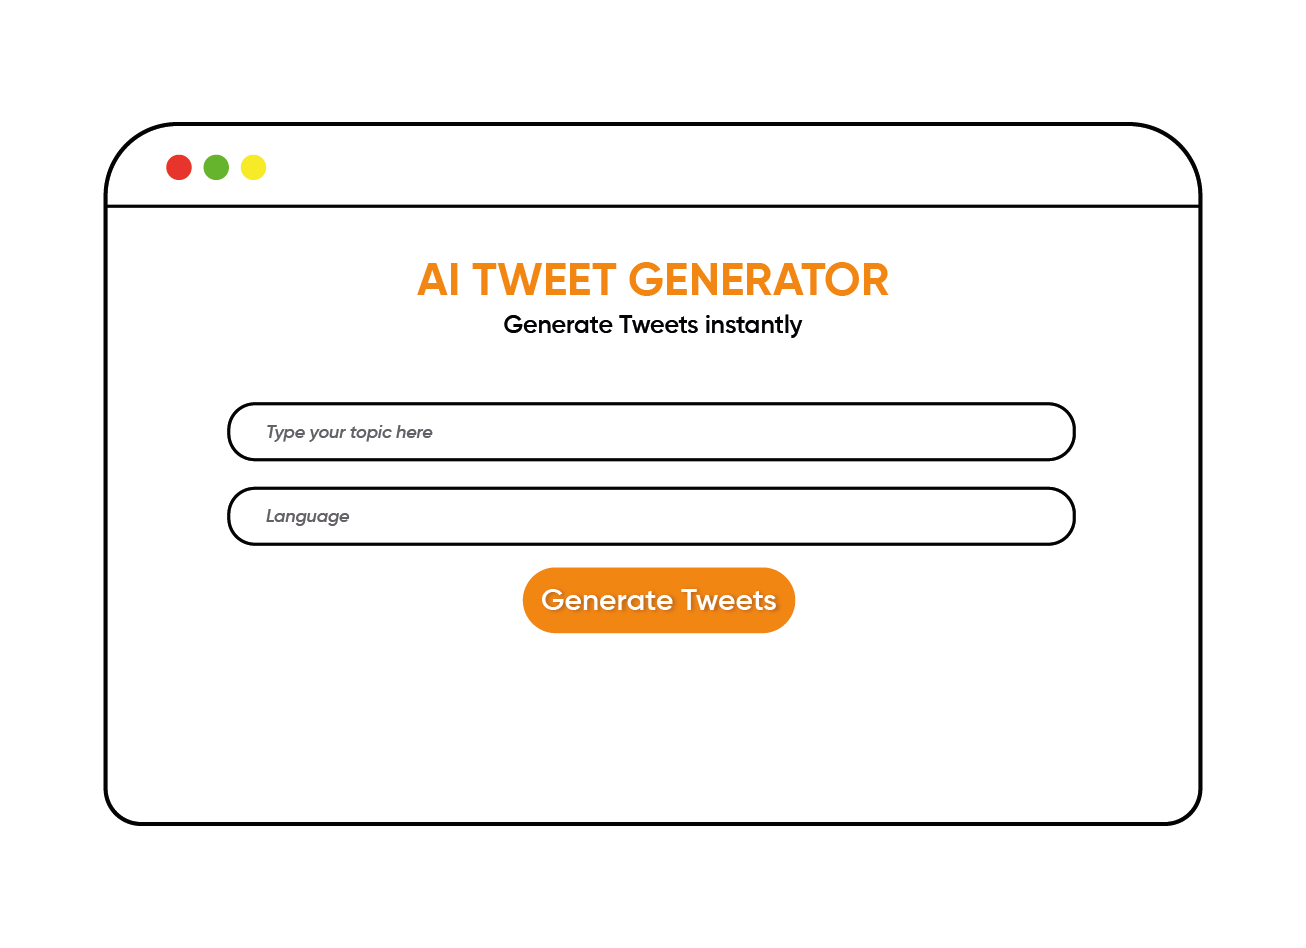 How to Use AI Twitter Thread Generator?